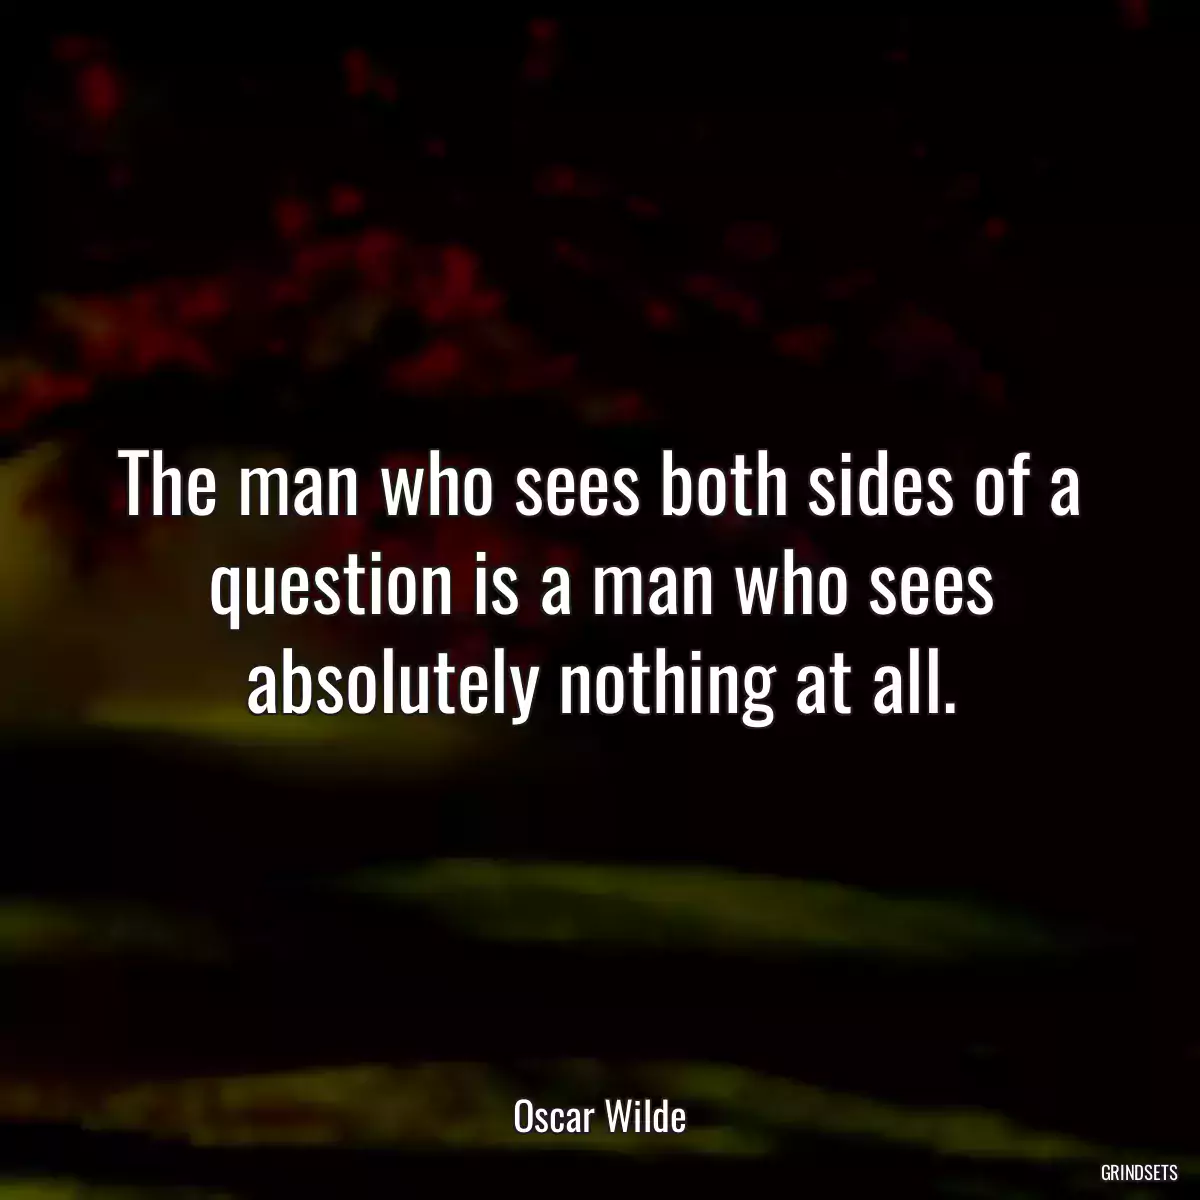 The man who sees both sides of a question is a man who sees absolutely nothing at all.